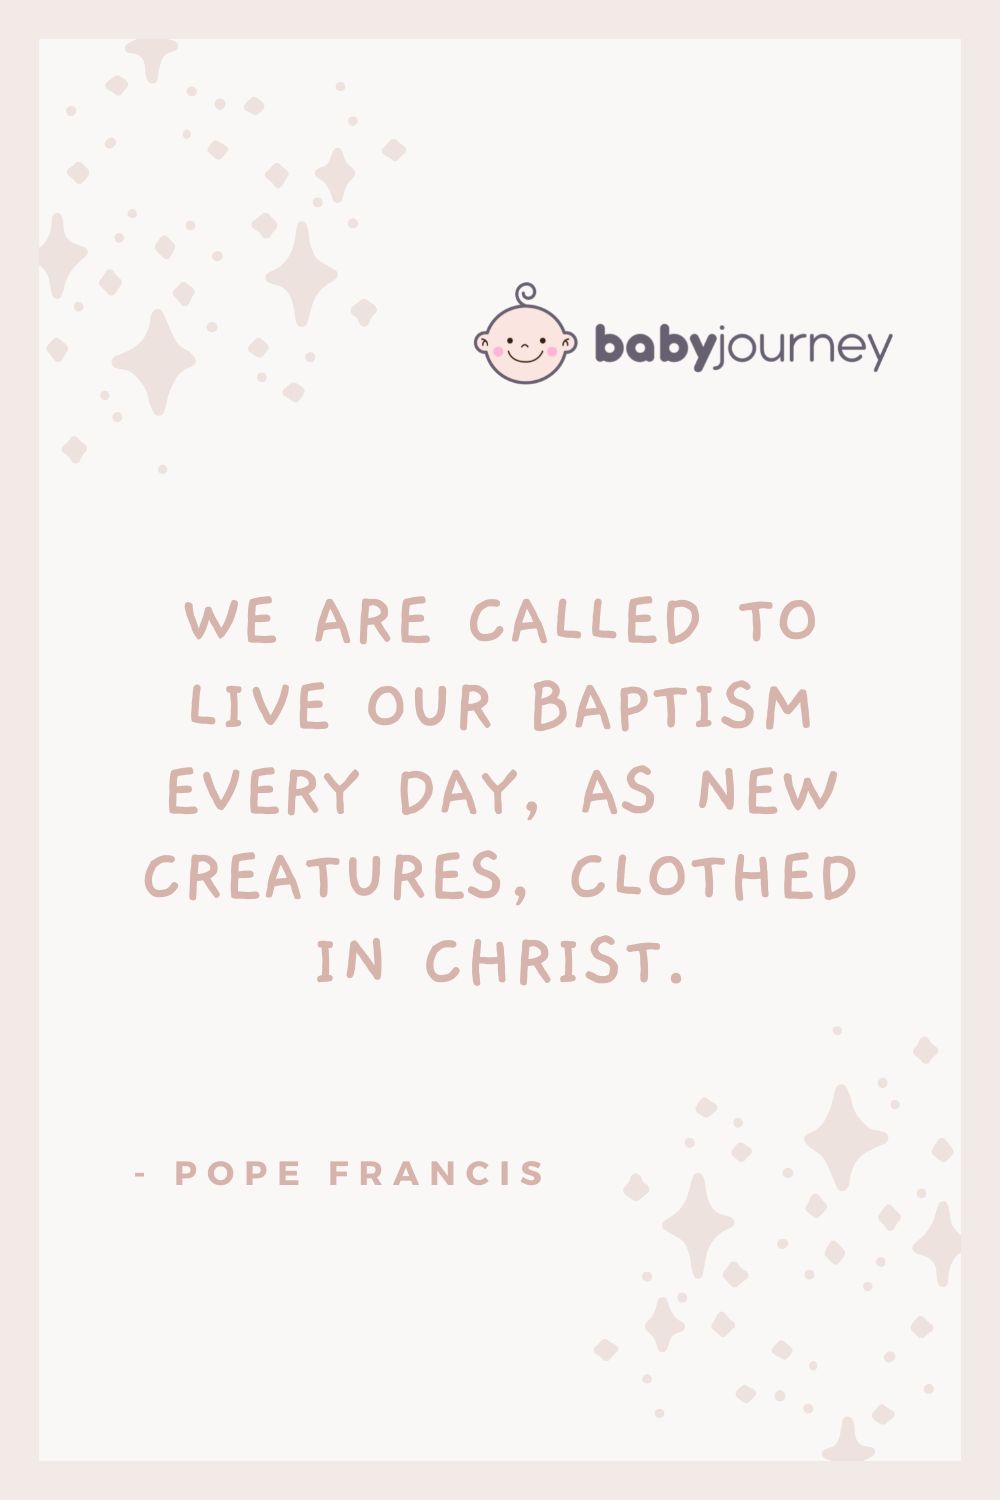 We are called to live our baptism every day, as new creatures, clothed in Christ. - Pope Francis - Baptism quotes for babies - Baby Journey